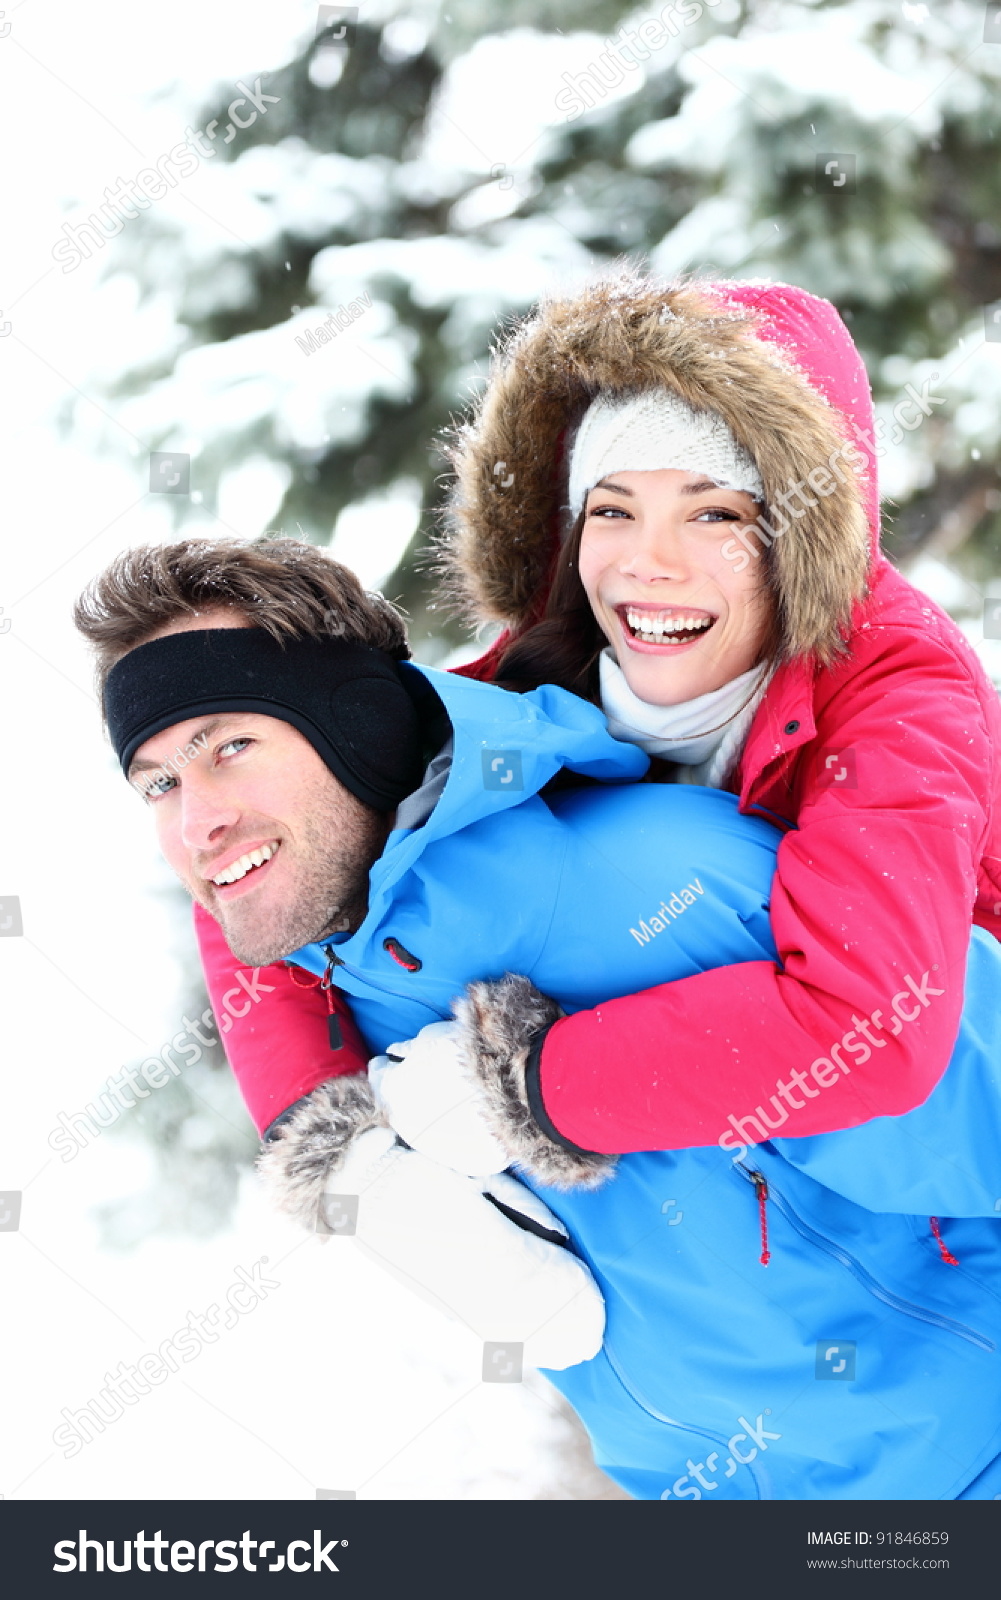 http://image.shutterstock.com/z/stock-photo-happy-winter-couple-piggybacking-in-snow-smiling-and-joyful-at-camera-beautiful-young-multi-ethnic-91846859.jpg